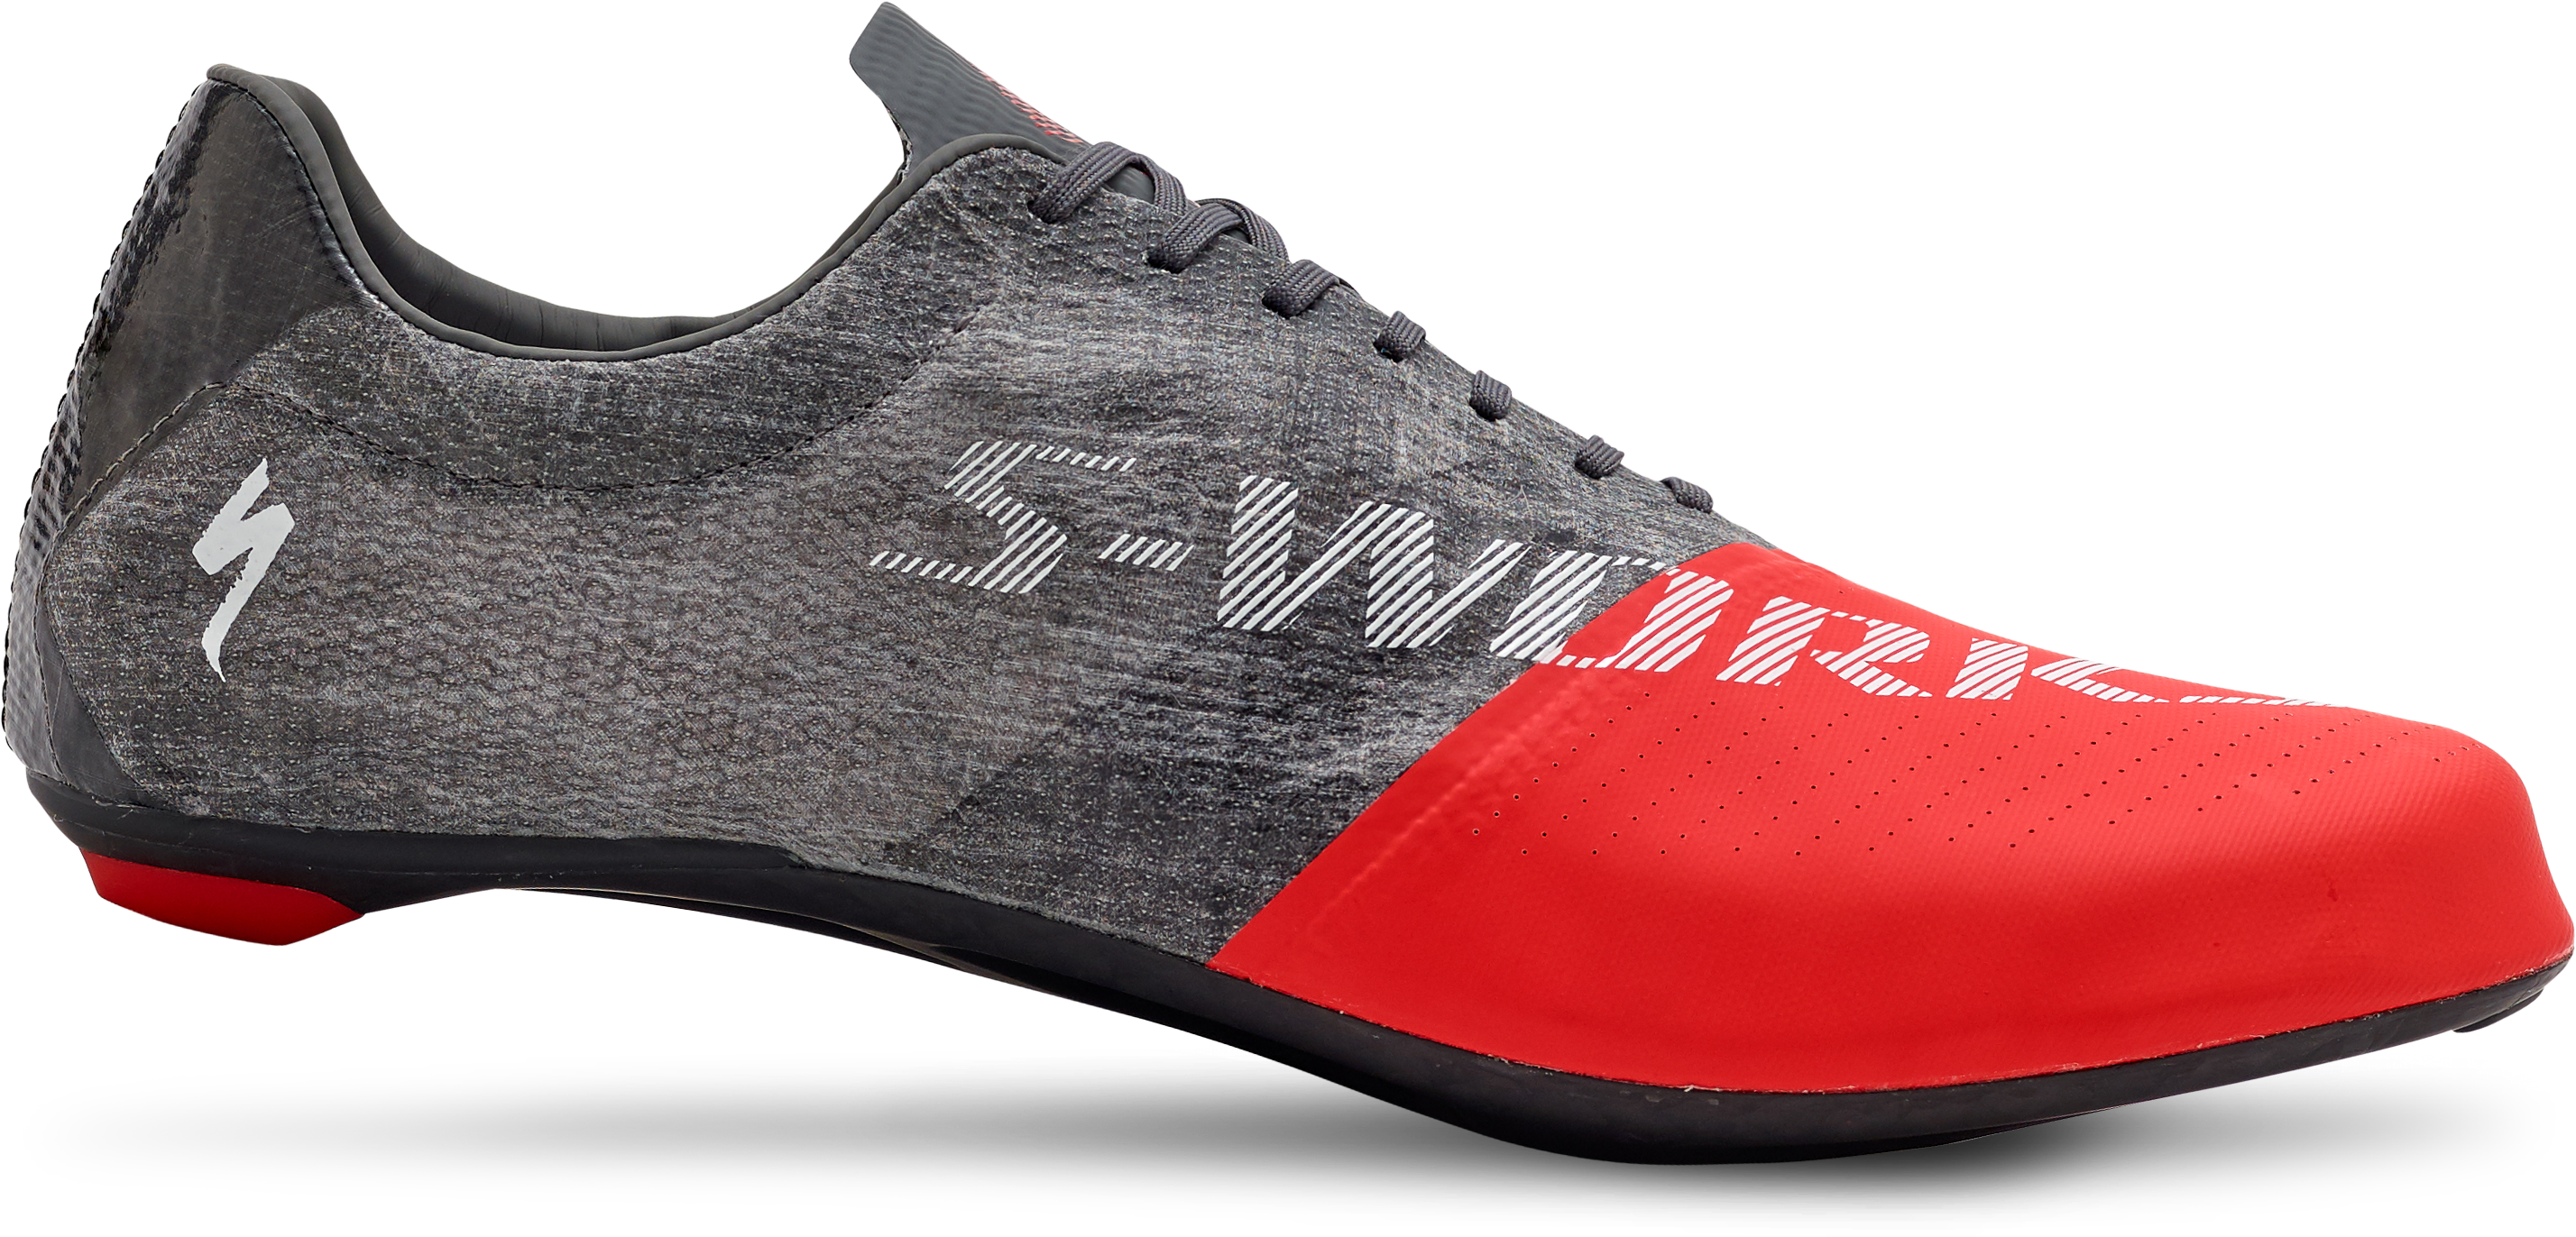 S-Works EXOS 99 Road Shoes – LTD